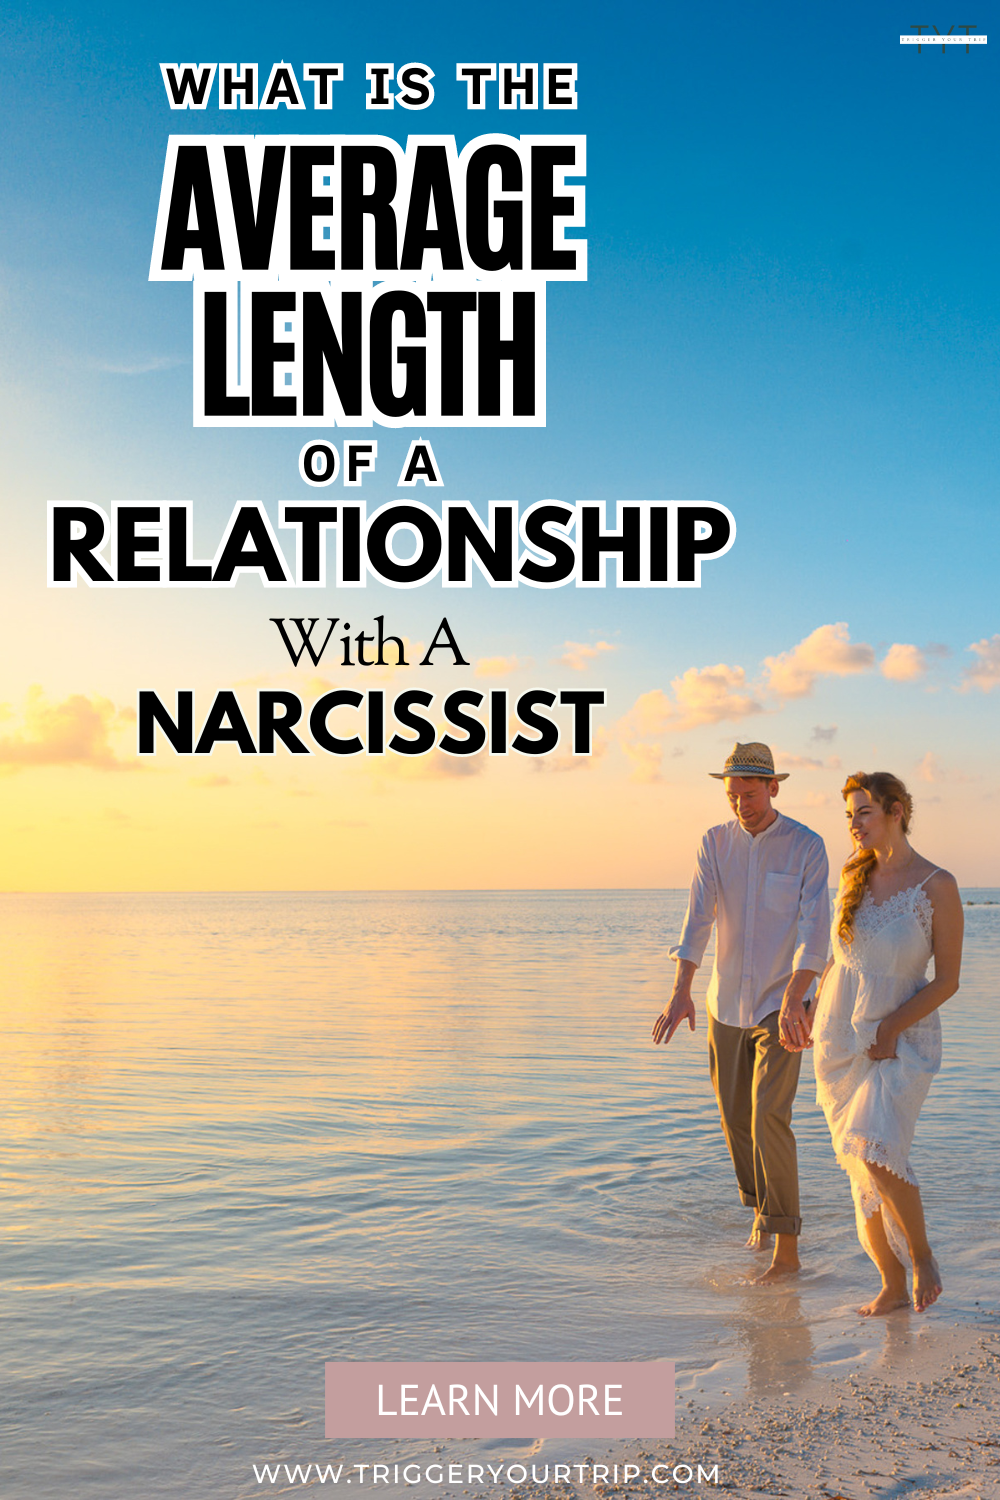 21 stages of a narcissistic relationship: the average length og a narcissist relationship and stages of a narcissist